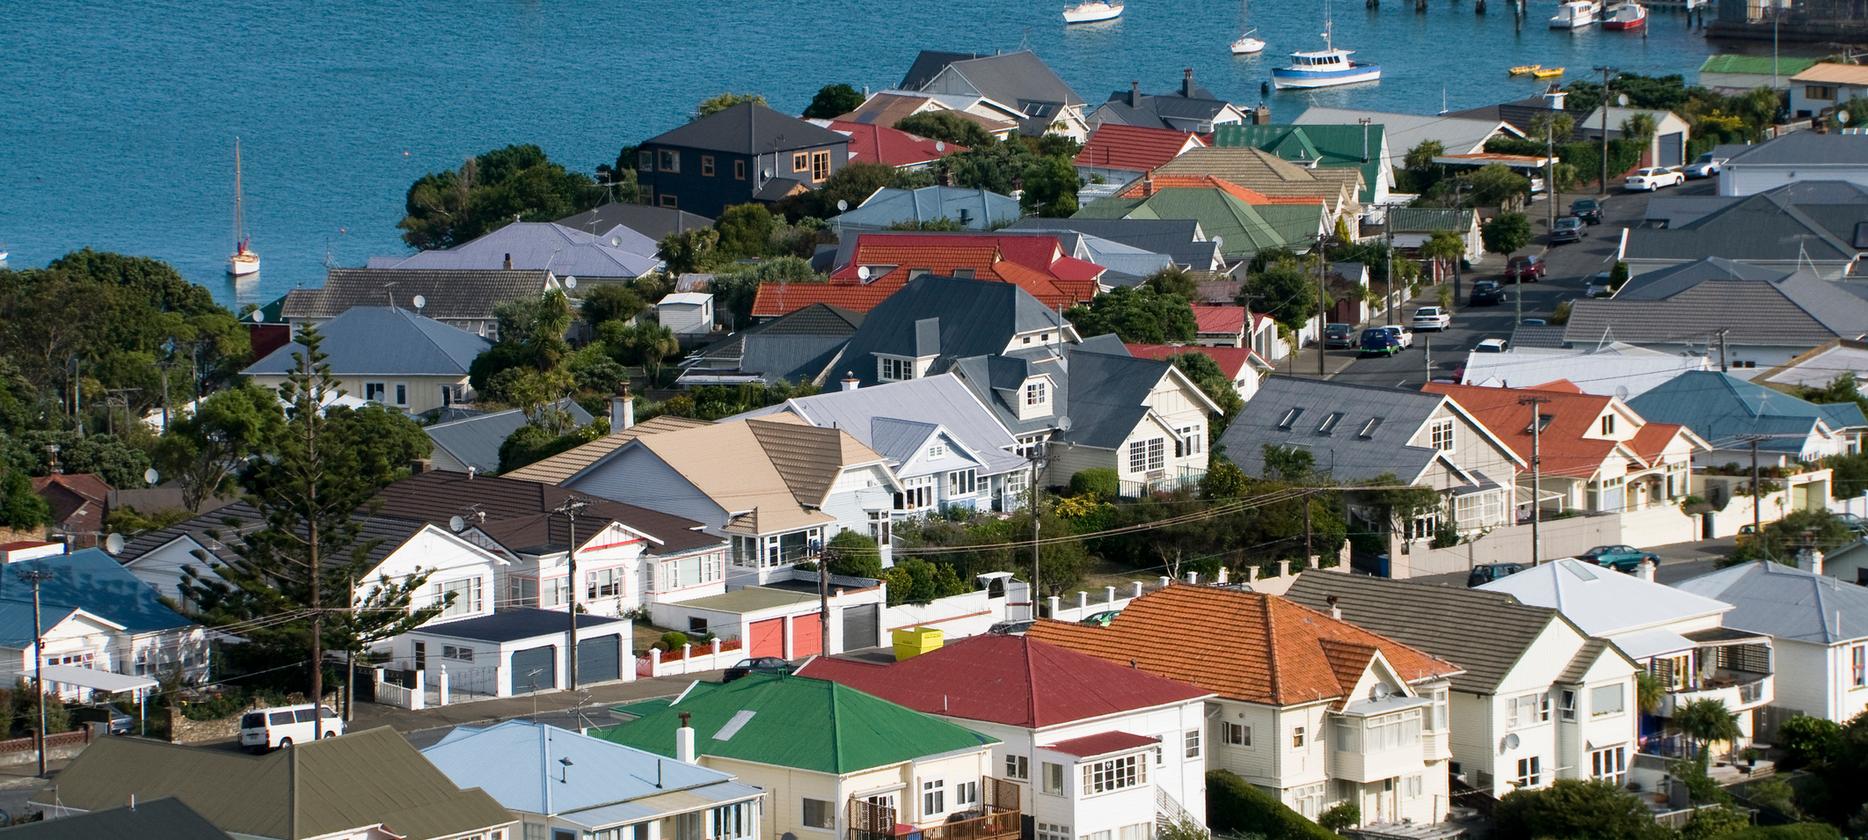 House Price Index shows property values falling at fastest pace since the GFC